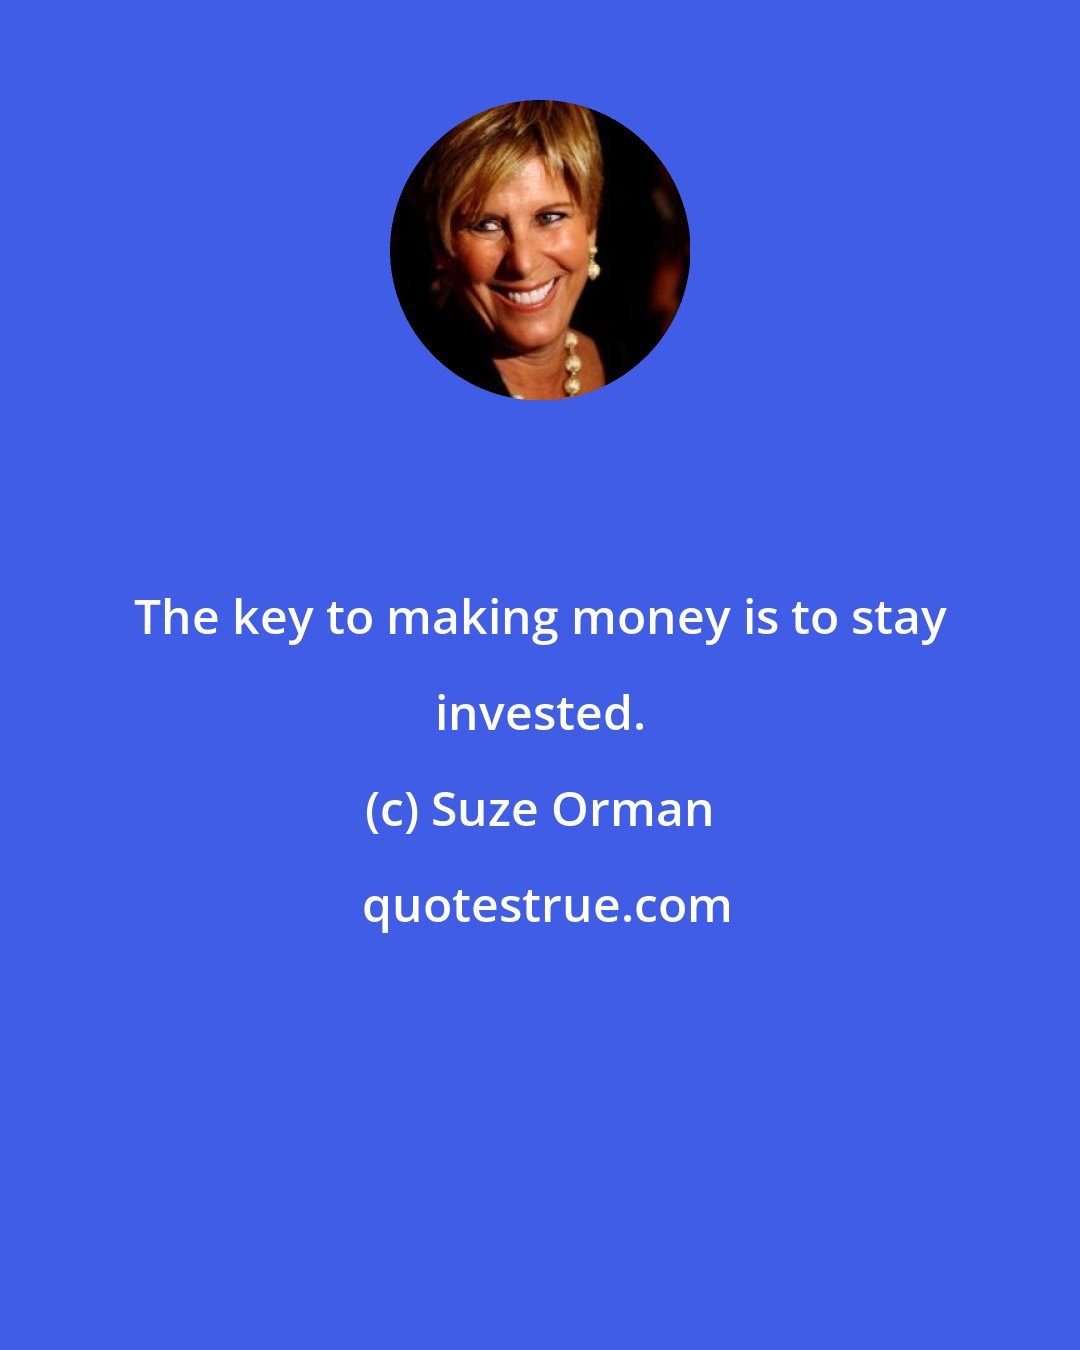 Suze Orman: The key to making money is to stay invested.